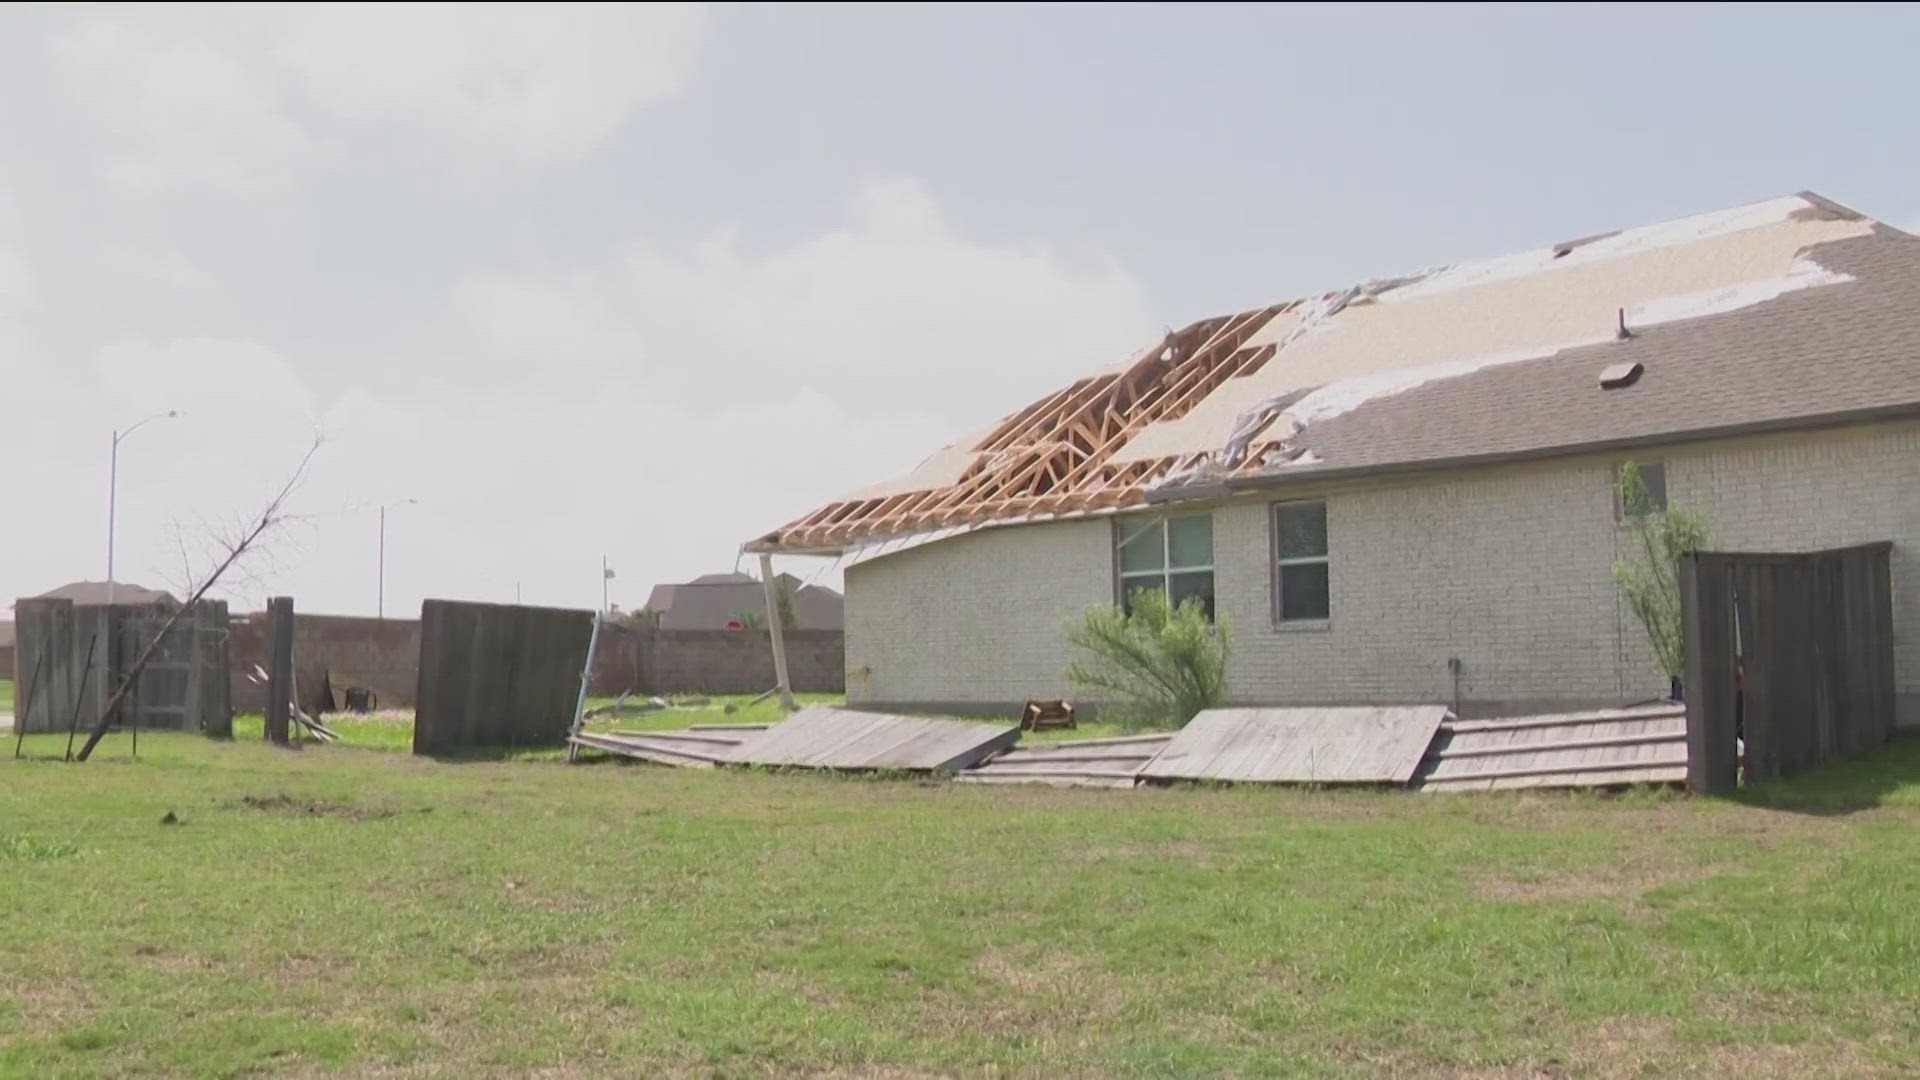 Manor residents are still cleaning up after a damaging round of storms rolled through Central Texas on Sunday.